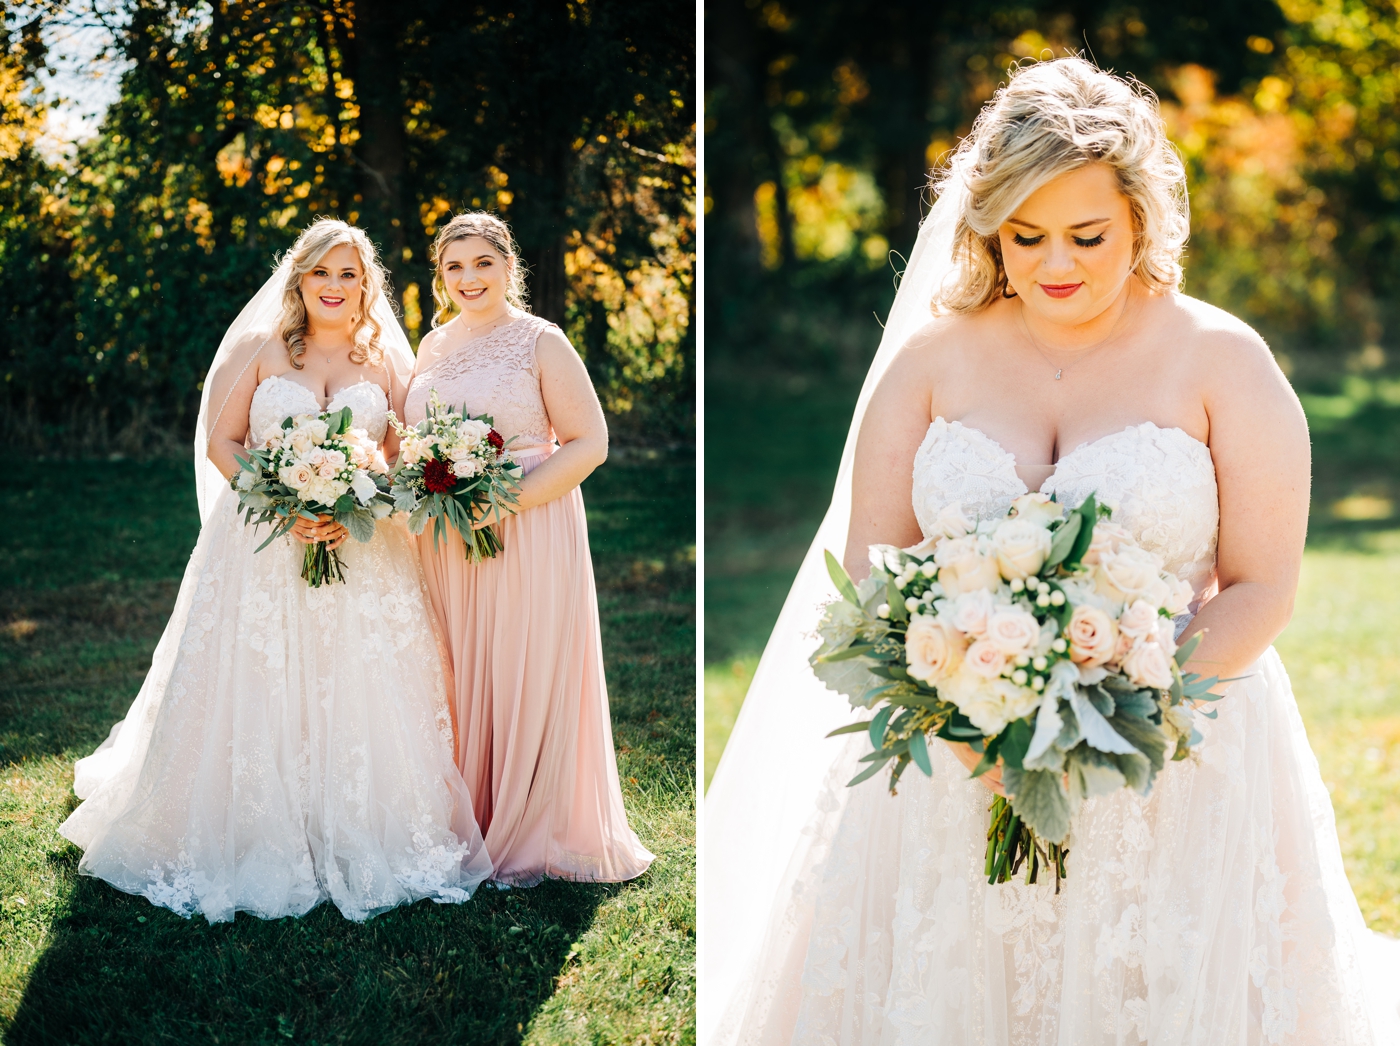 Bride and her bridesmaids who are wearing blush gowns from davids bridal